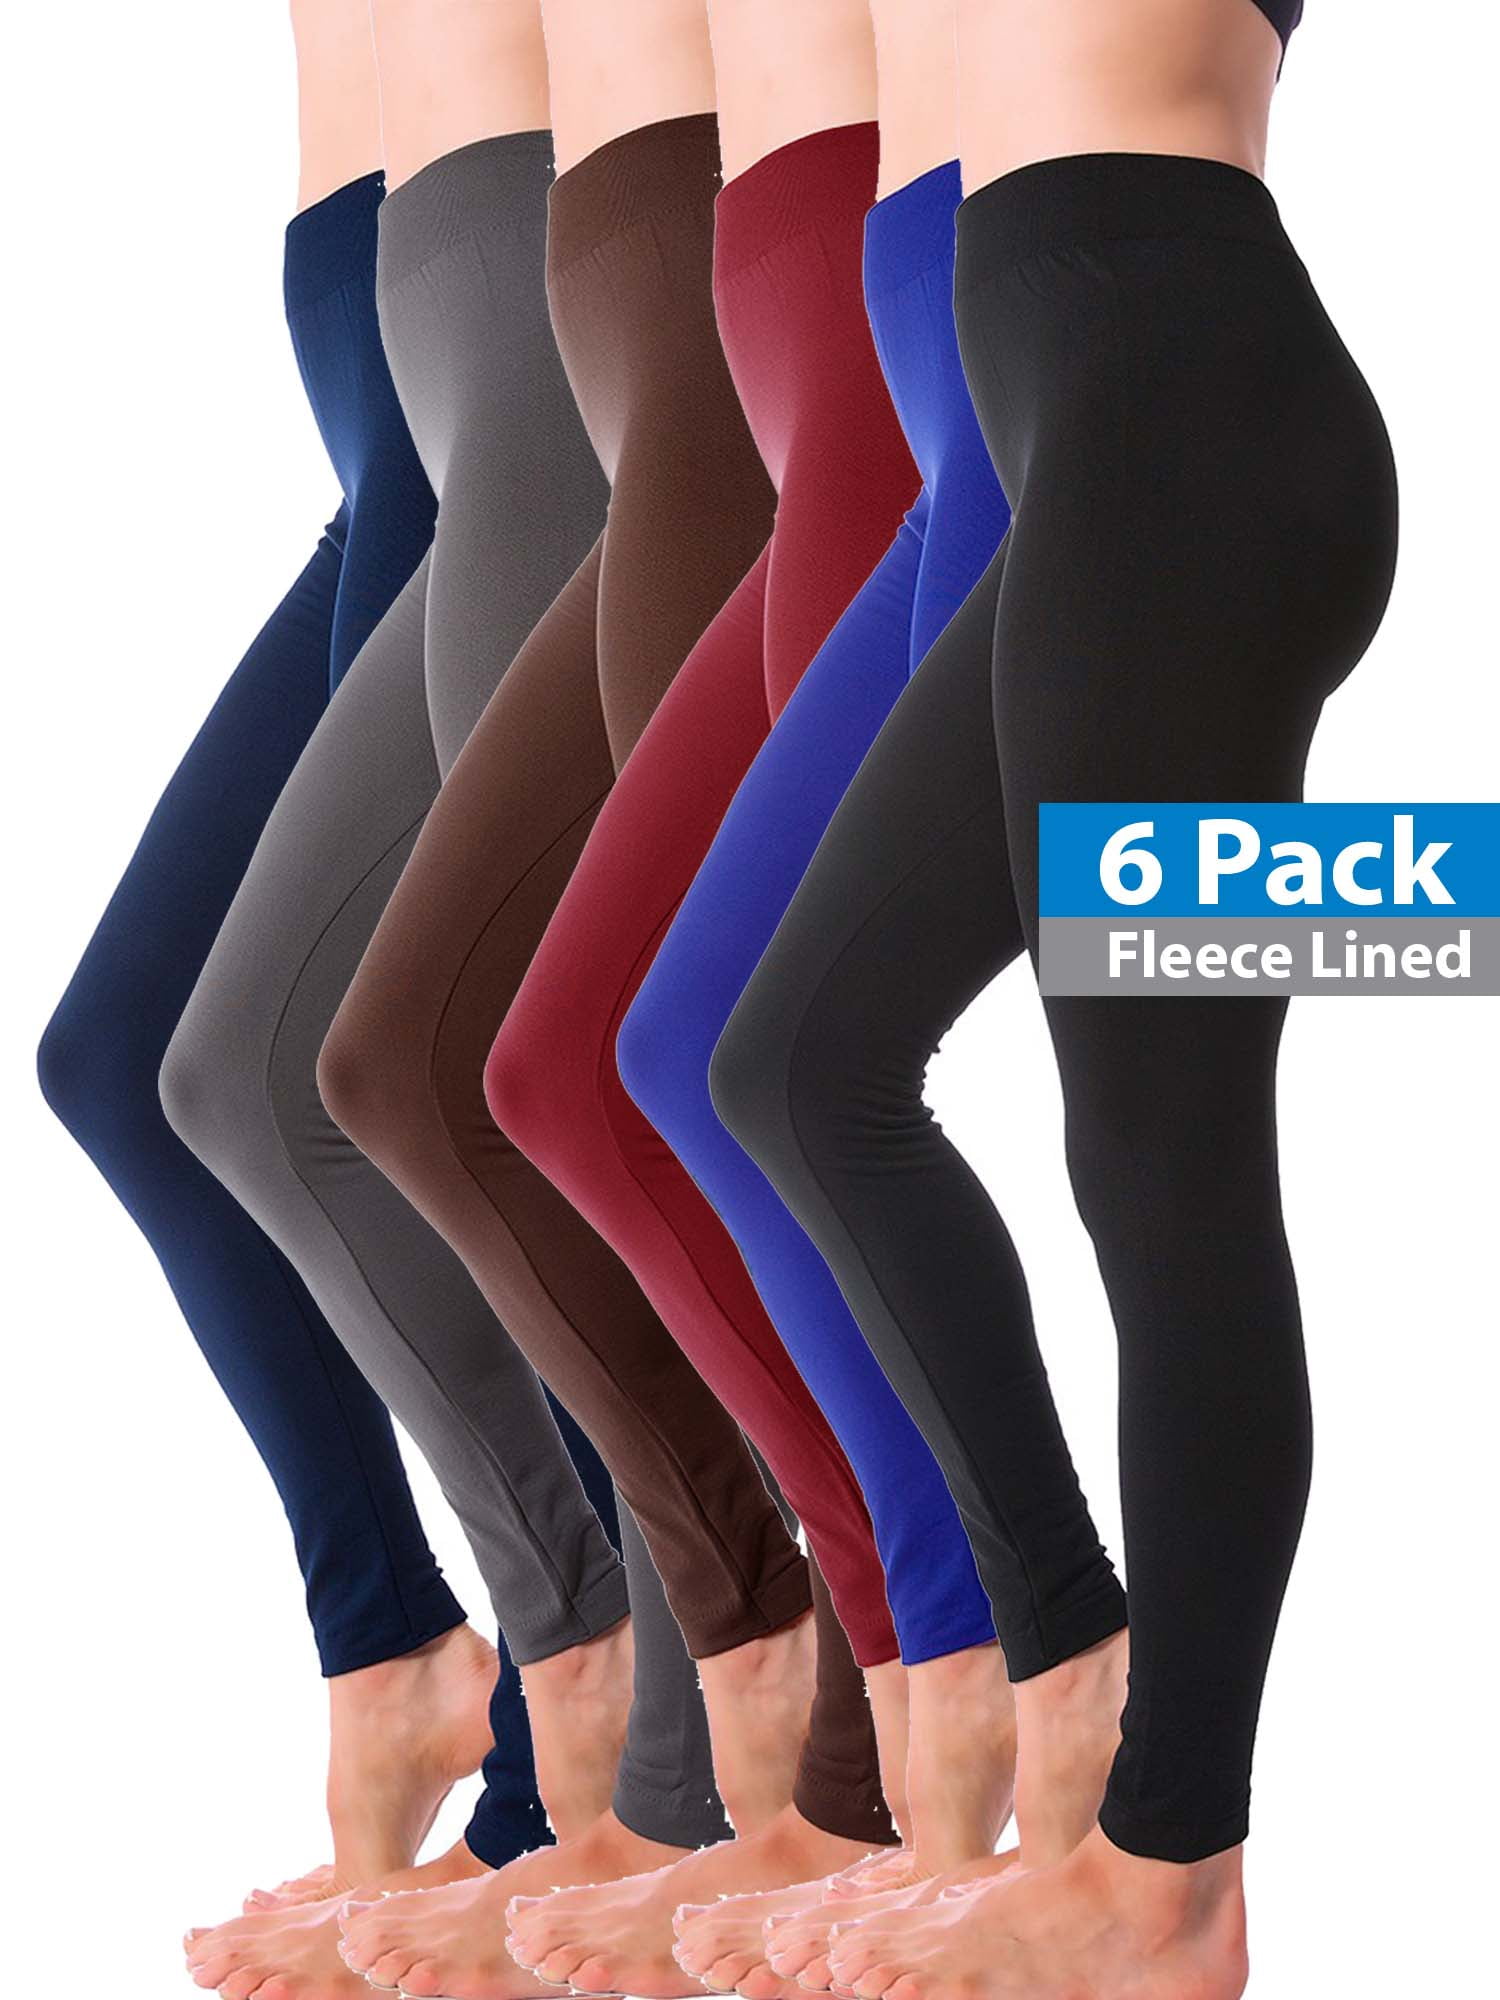 Women’s 6-Pack Brushed Fleece Lined Thick Leggings Seamless and Stretchy Full Length Pants High Waist Skinny Tights 